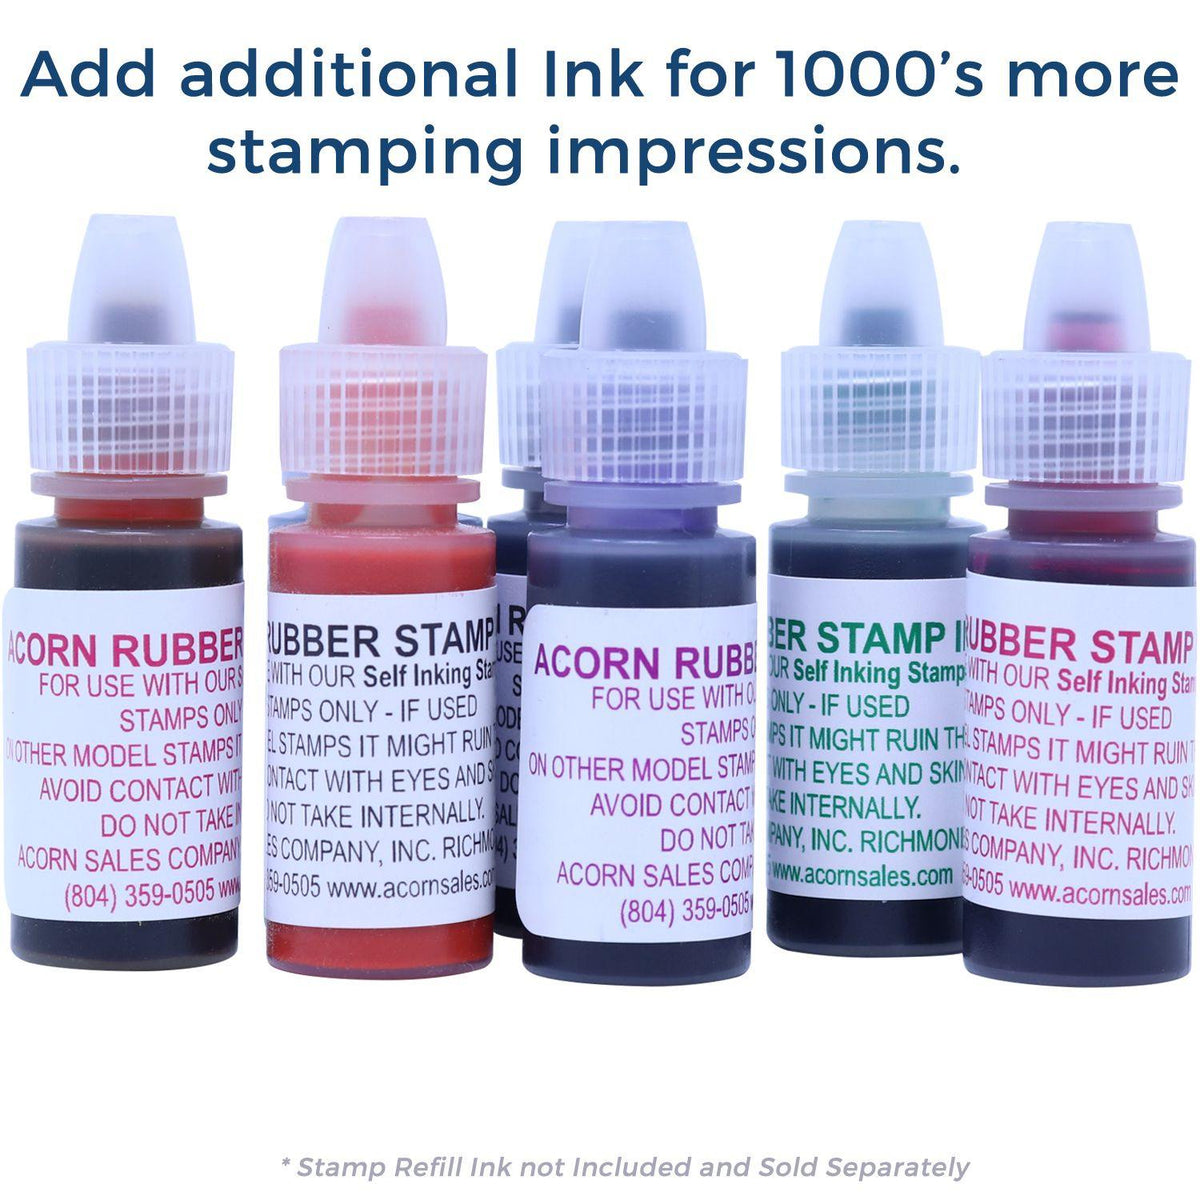 Refill Inks for Large Pre-Inked Quarantine Stamp Available